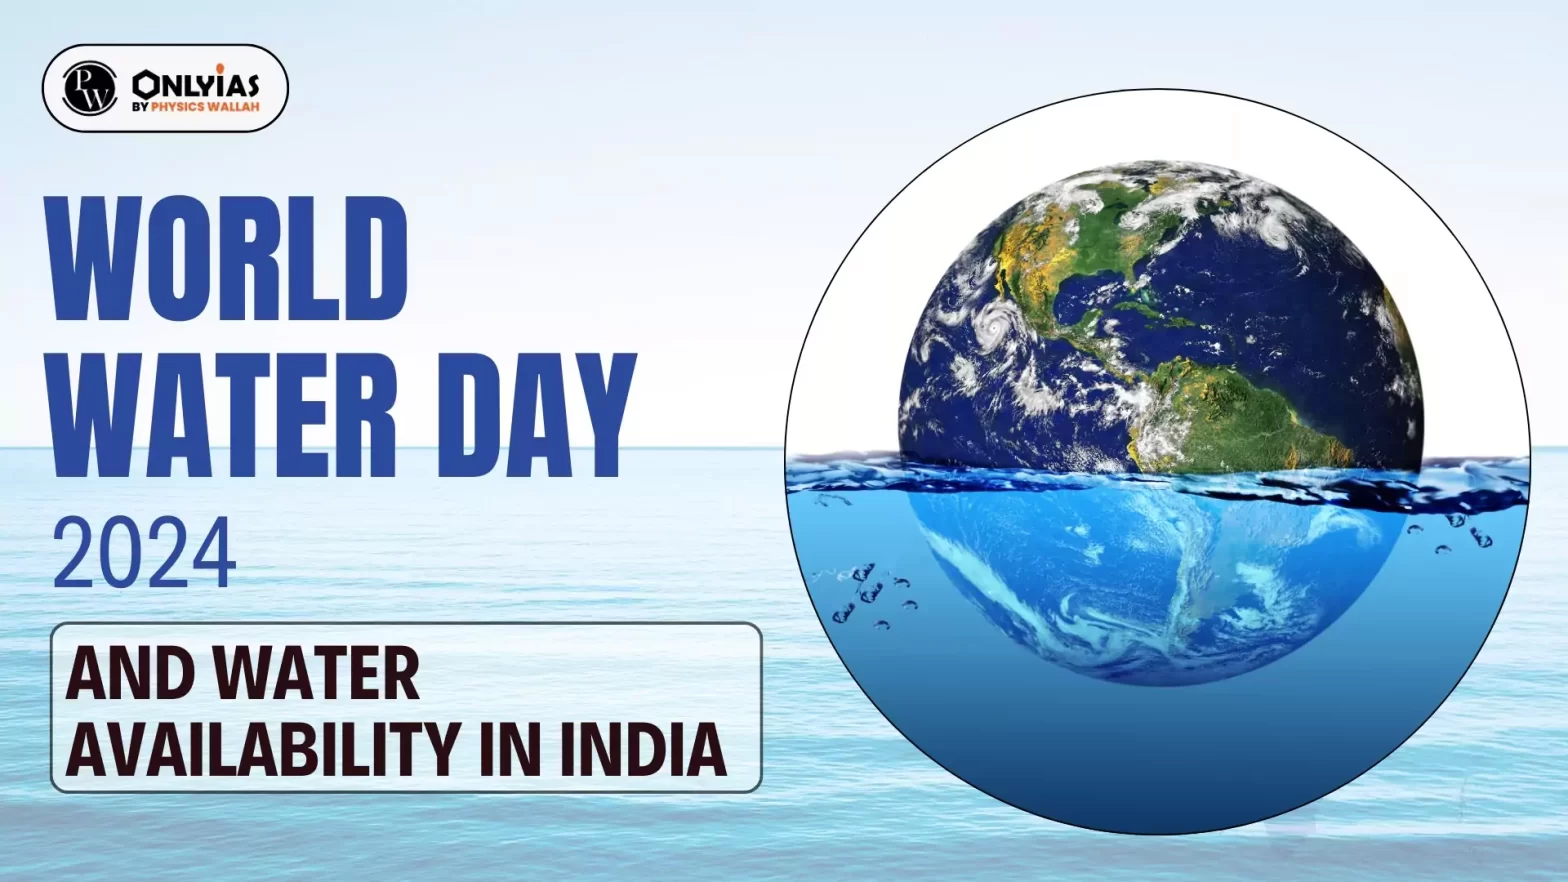 World Water Day 2024 and Water Availability in India